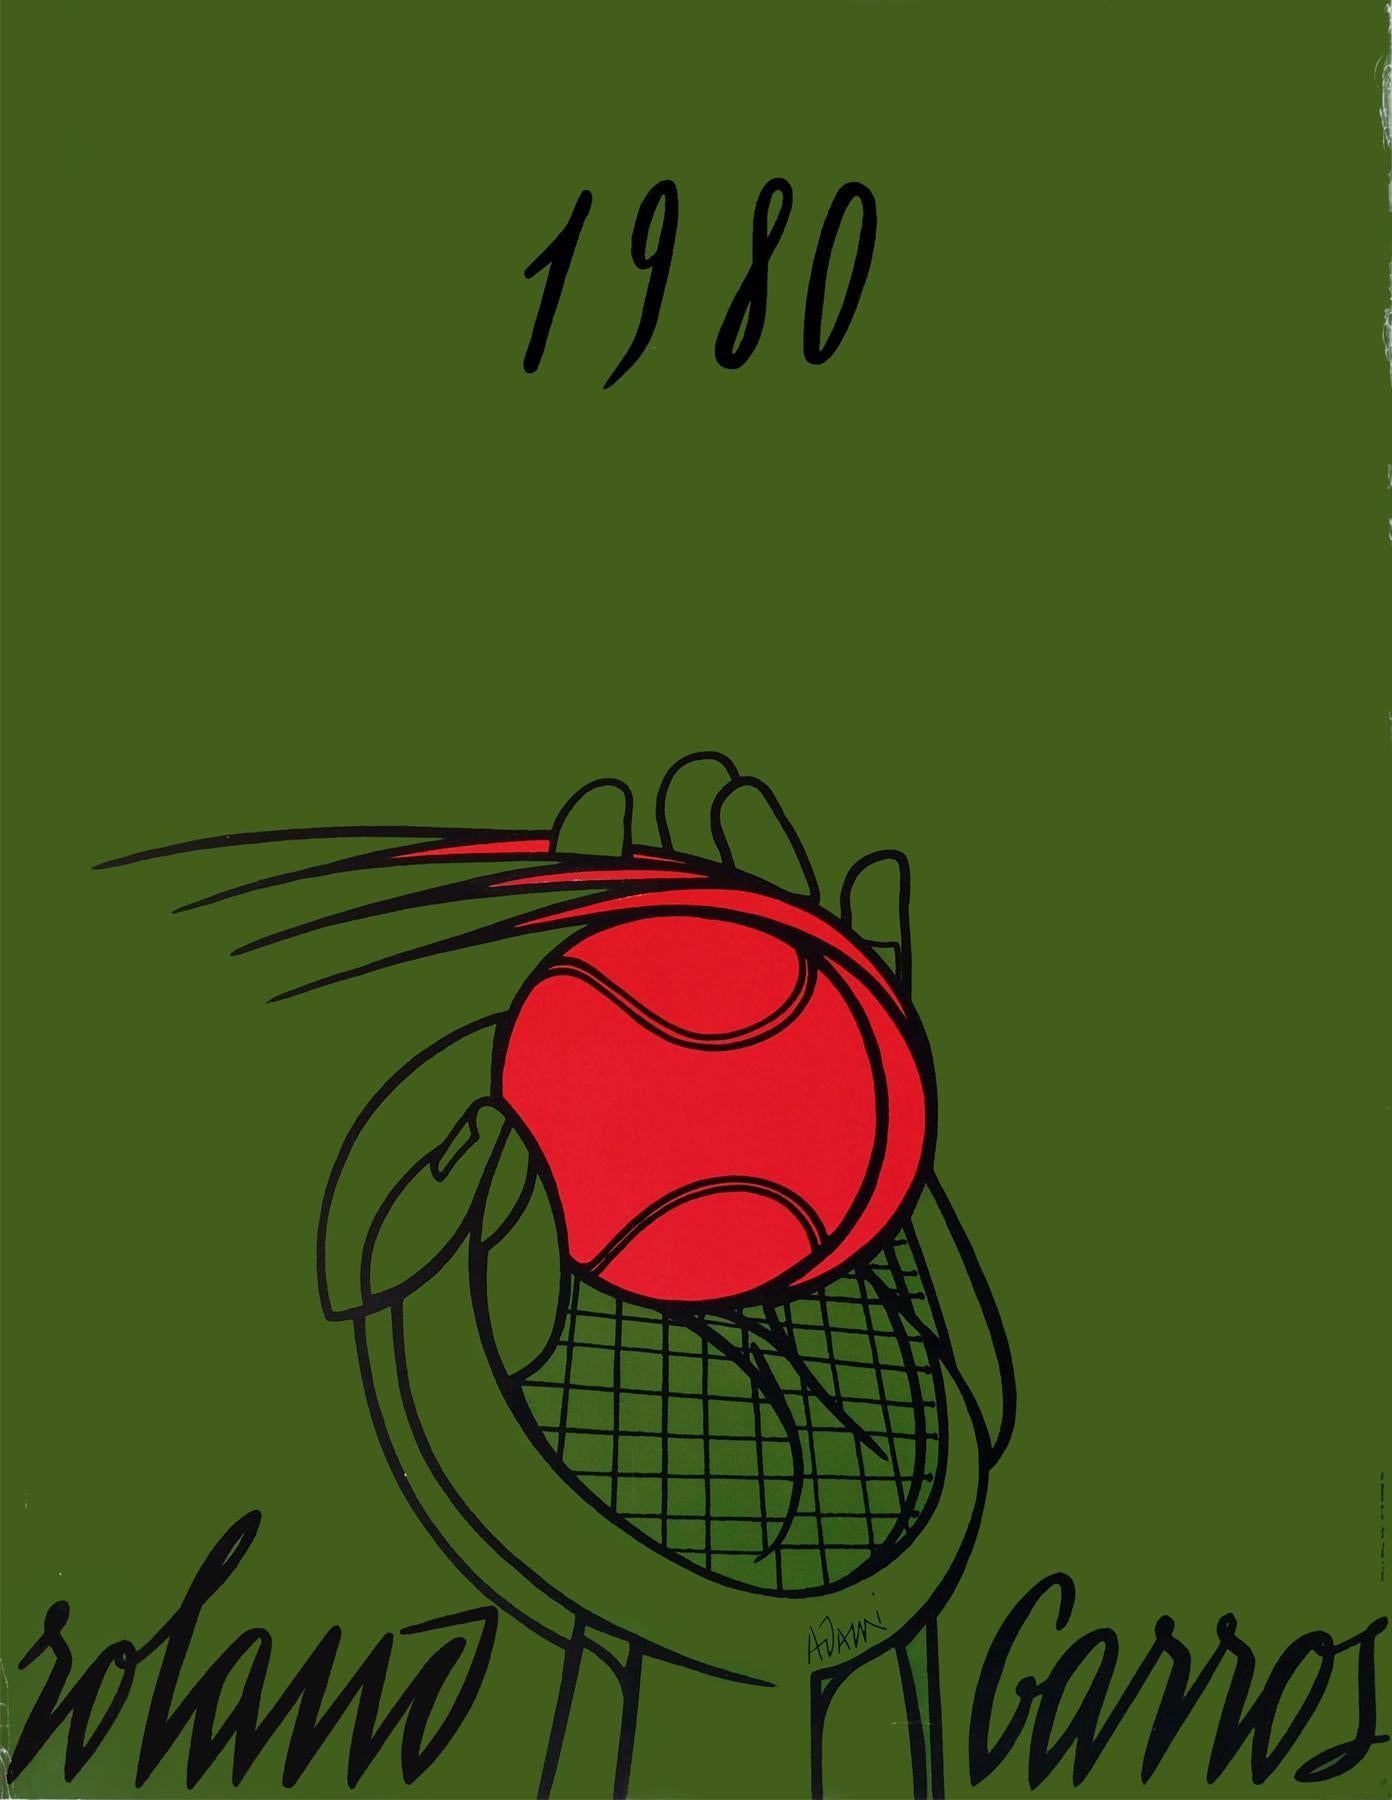 Rare original 1980 green promotional poster for the French Open at Roland Garros.

Freehand illustration design by Valerio Adami.

Rolled.

Measures: L 75cm x W 57cm.